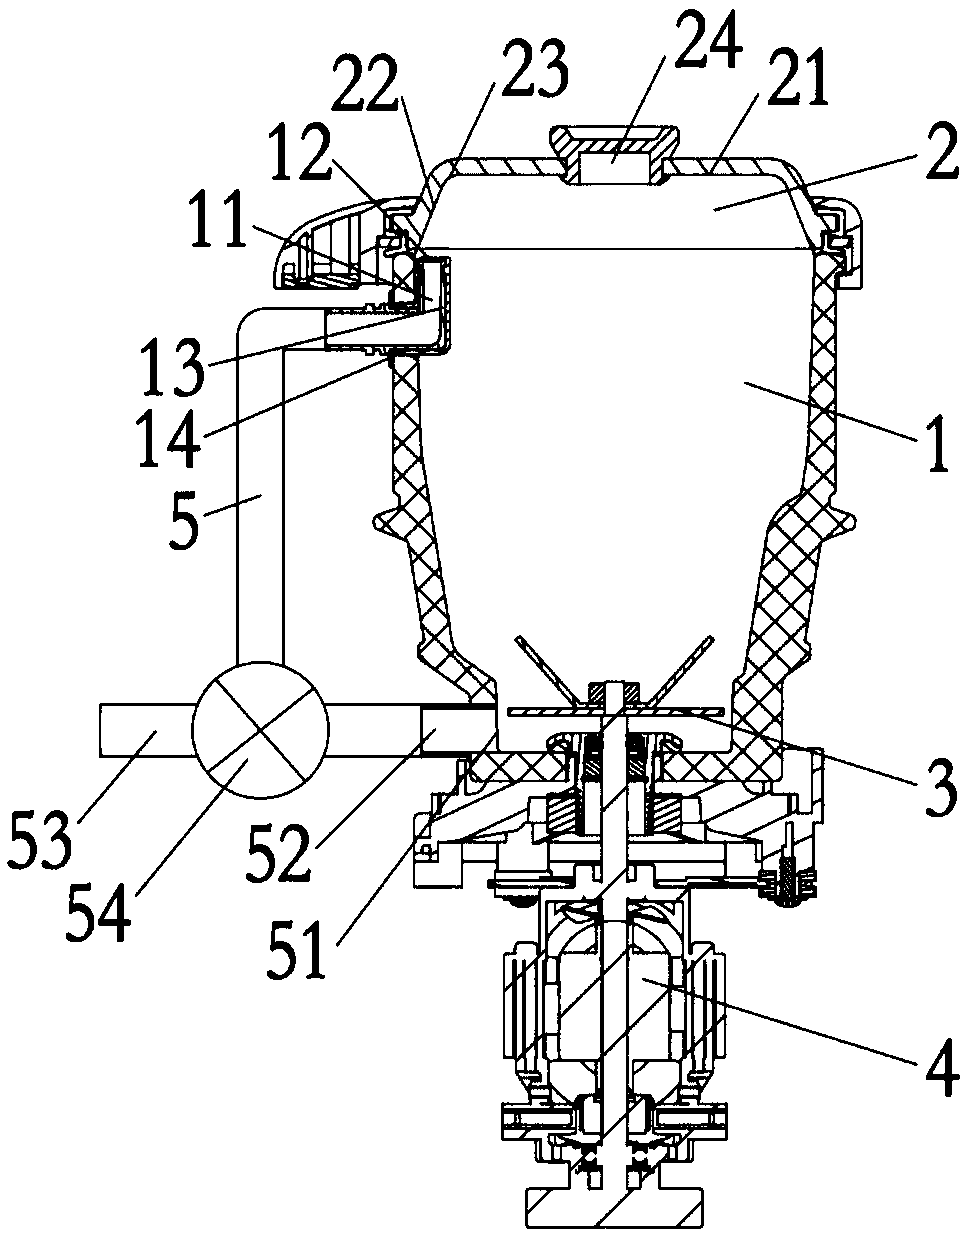 A self-circulating cleaning food processing machine